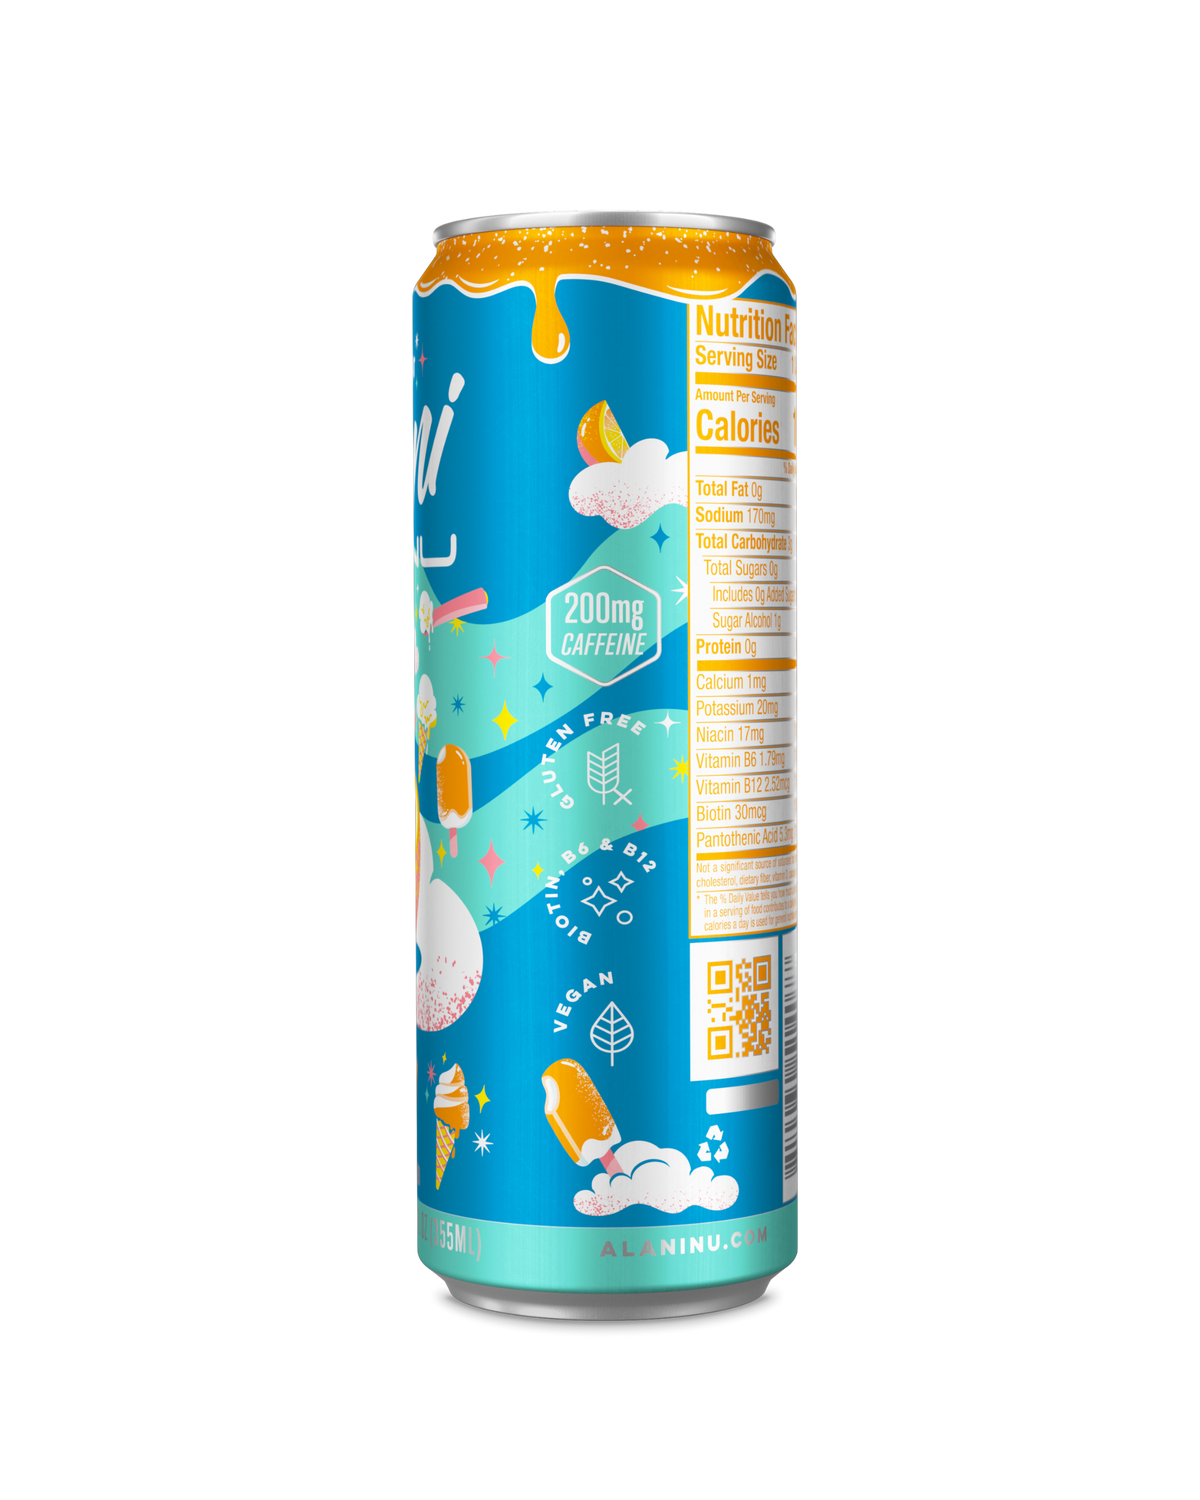 A side view of energy drink in Dream Float flavor showcasing product details such as vegan friendly, caffeine details and gluten free details. 